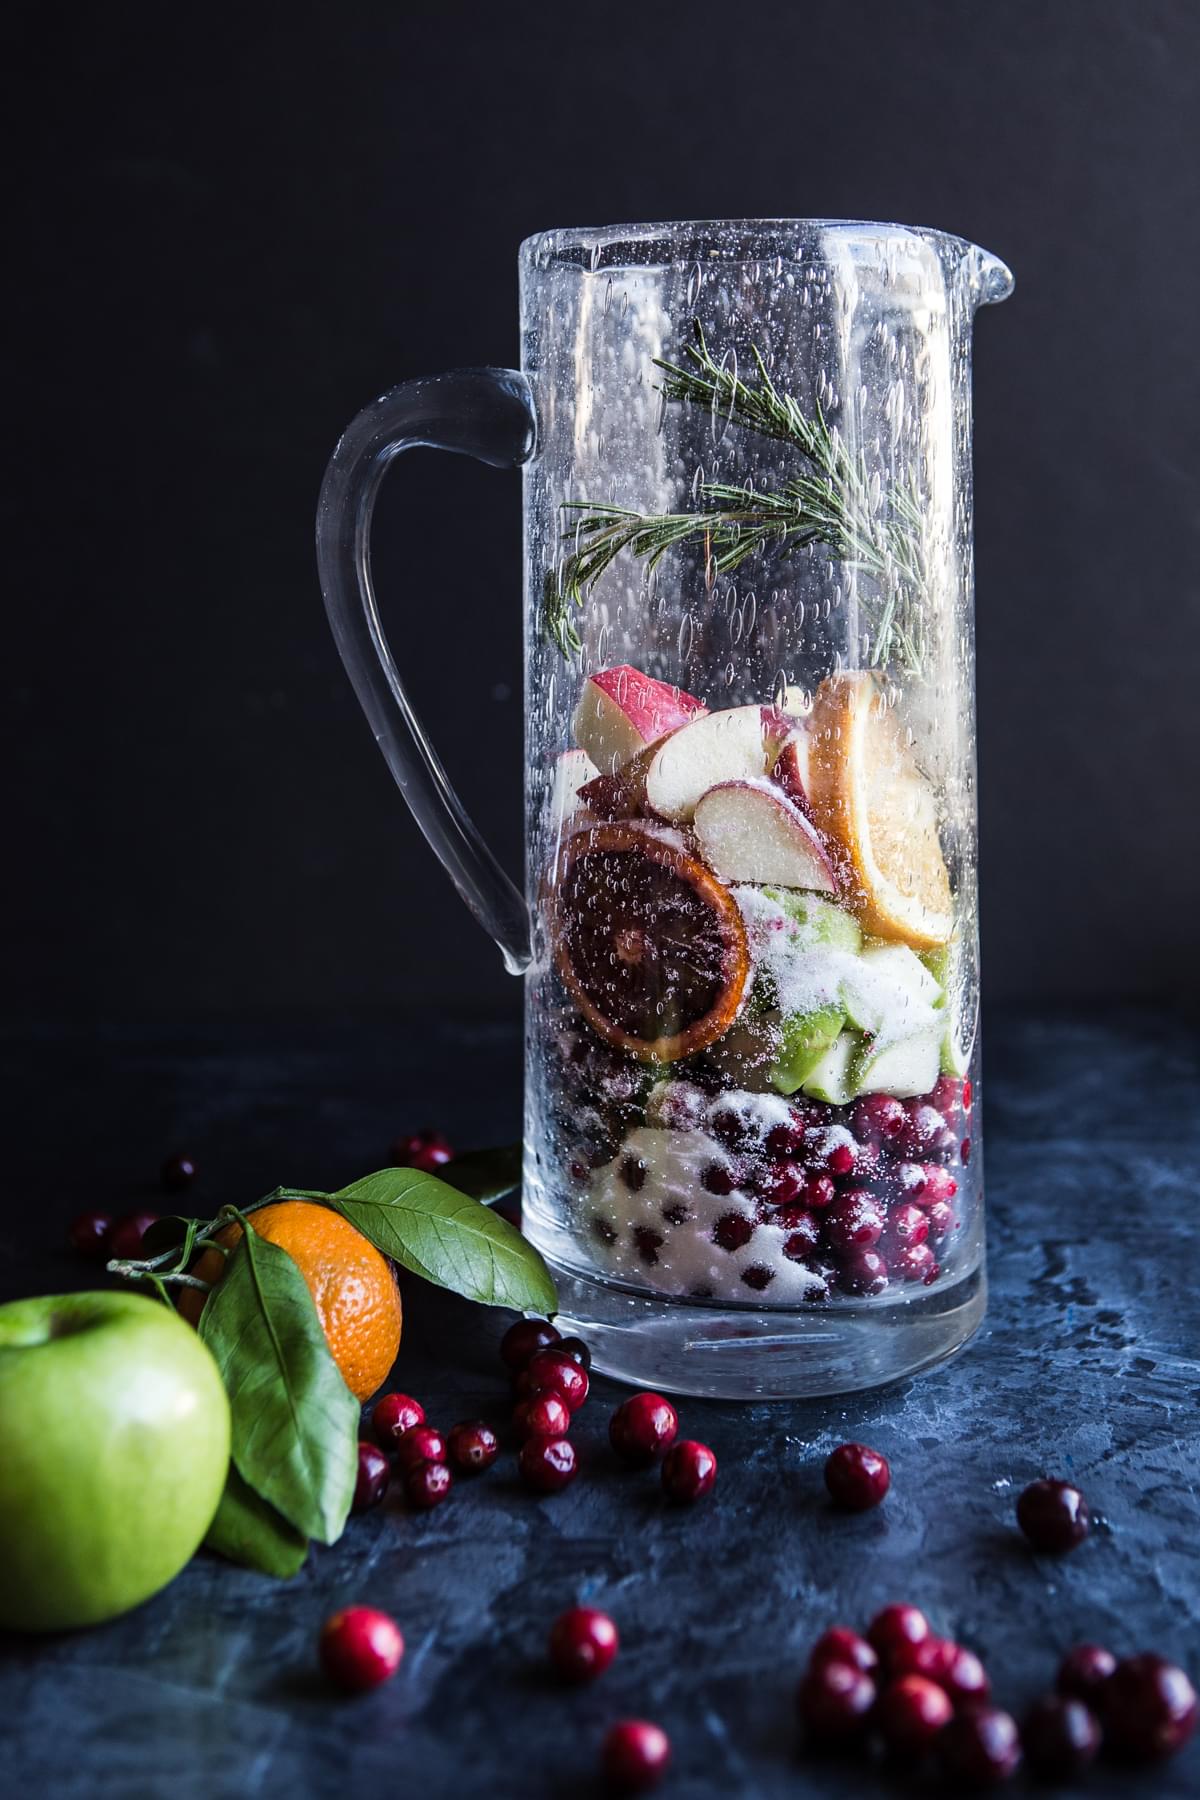 apples, oranges, cranberries and rosemary, sugar and cinnamon in a pitcher for red sangria